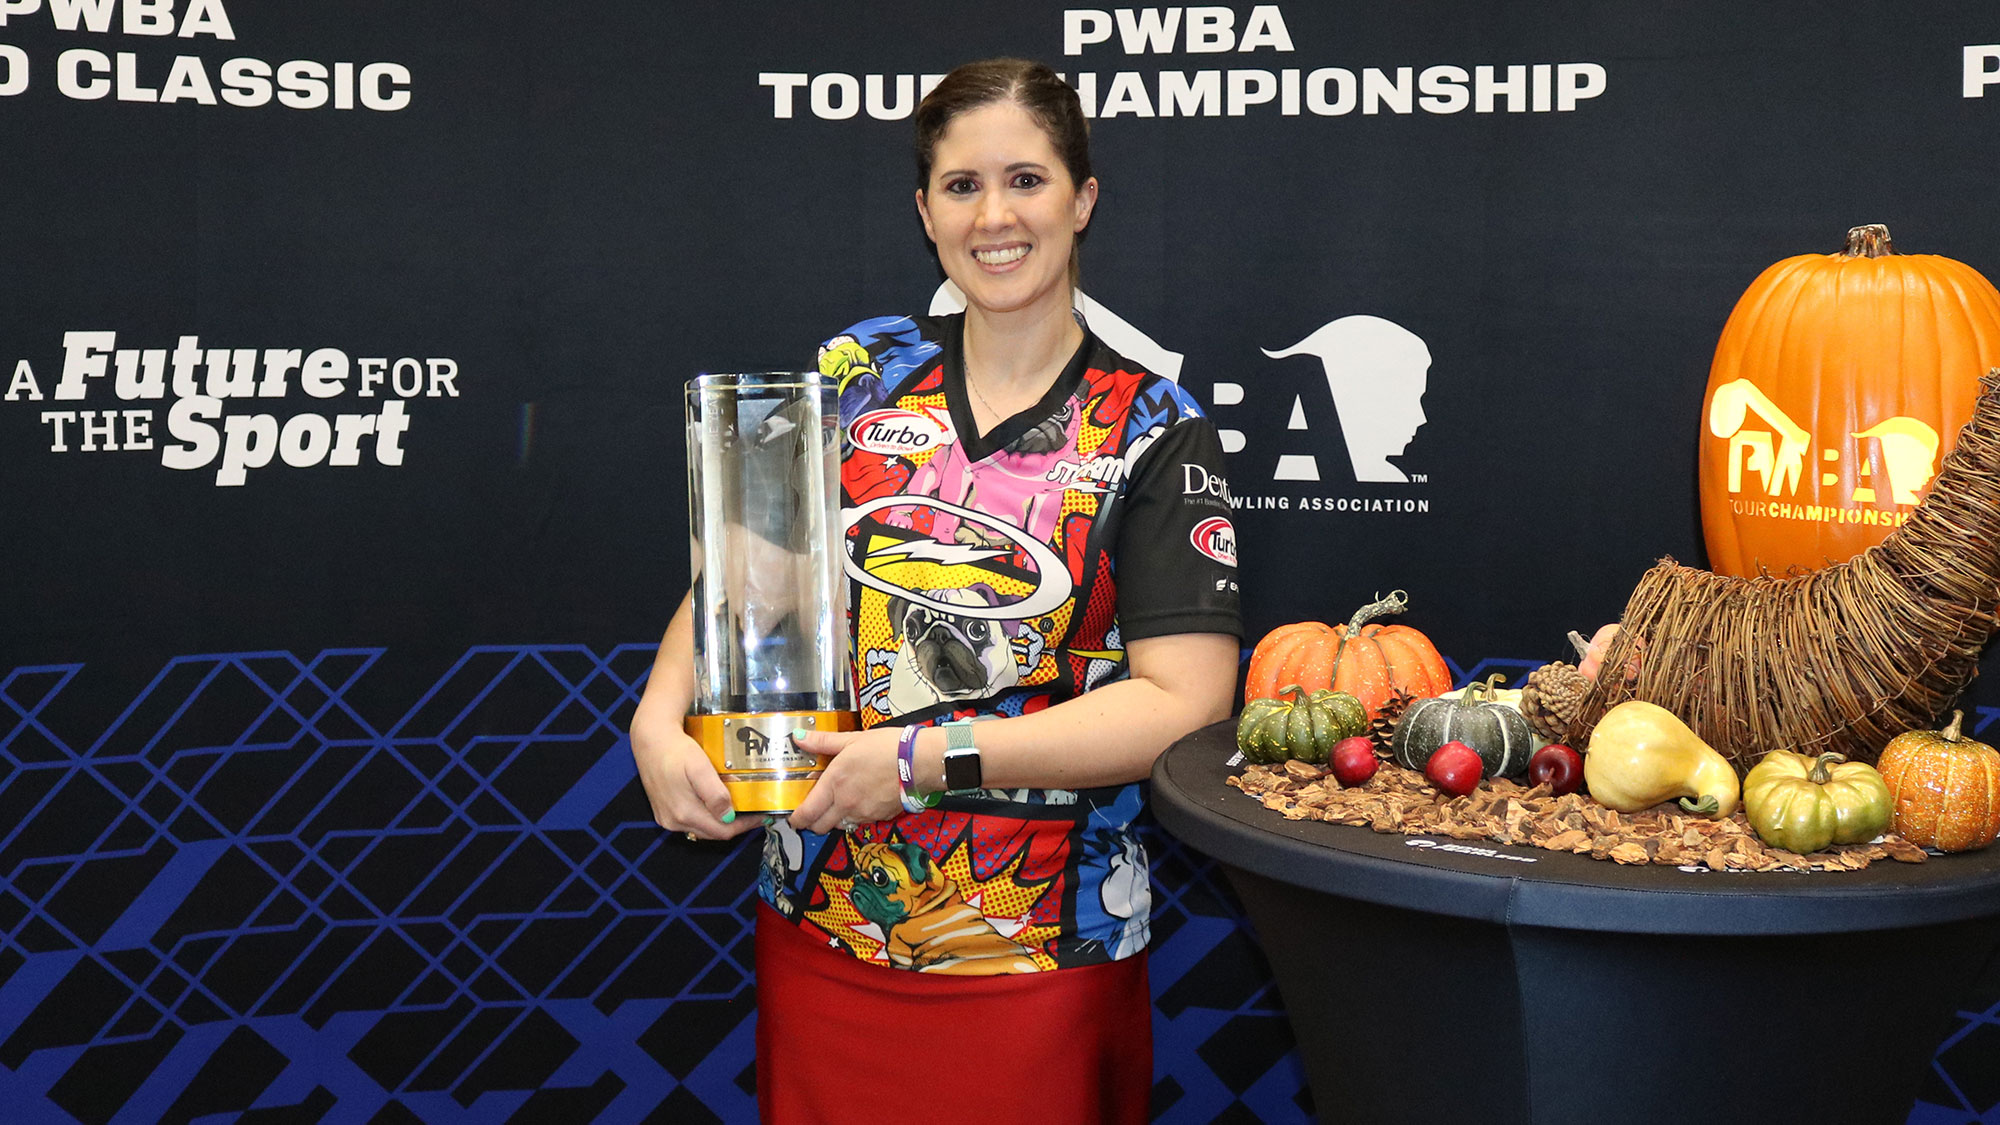 Bryanna Coté with PWBA Player of the Year trophy